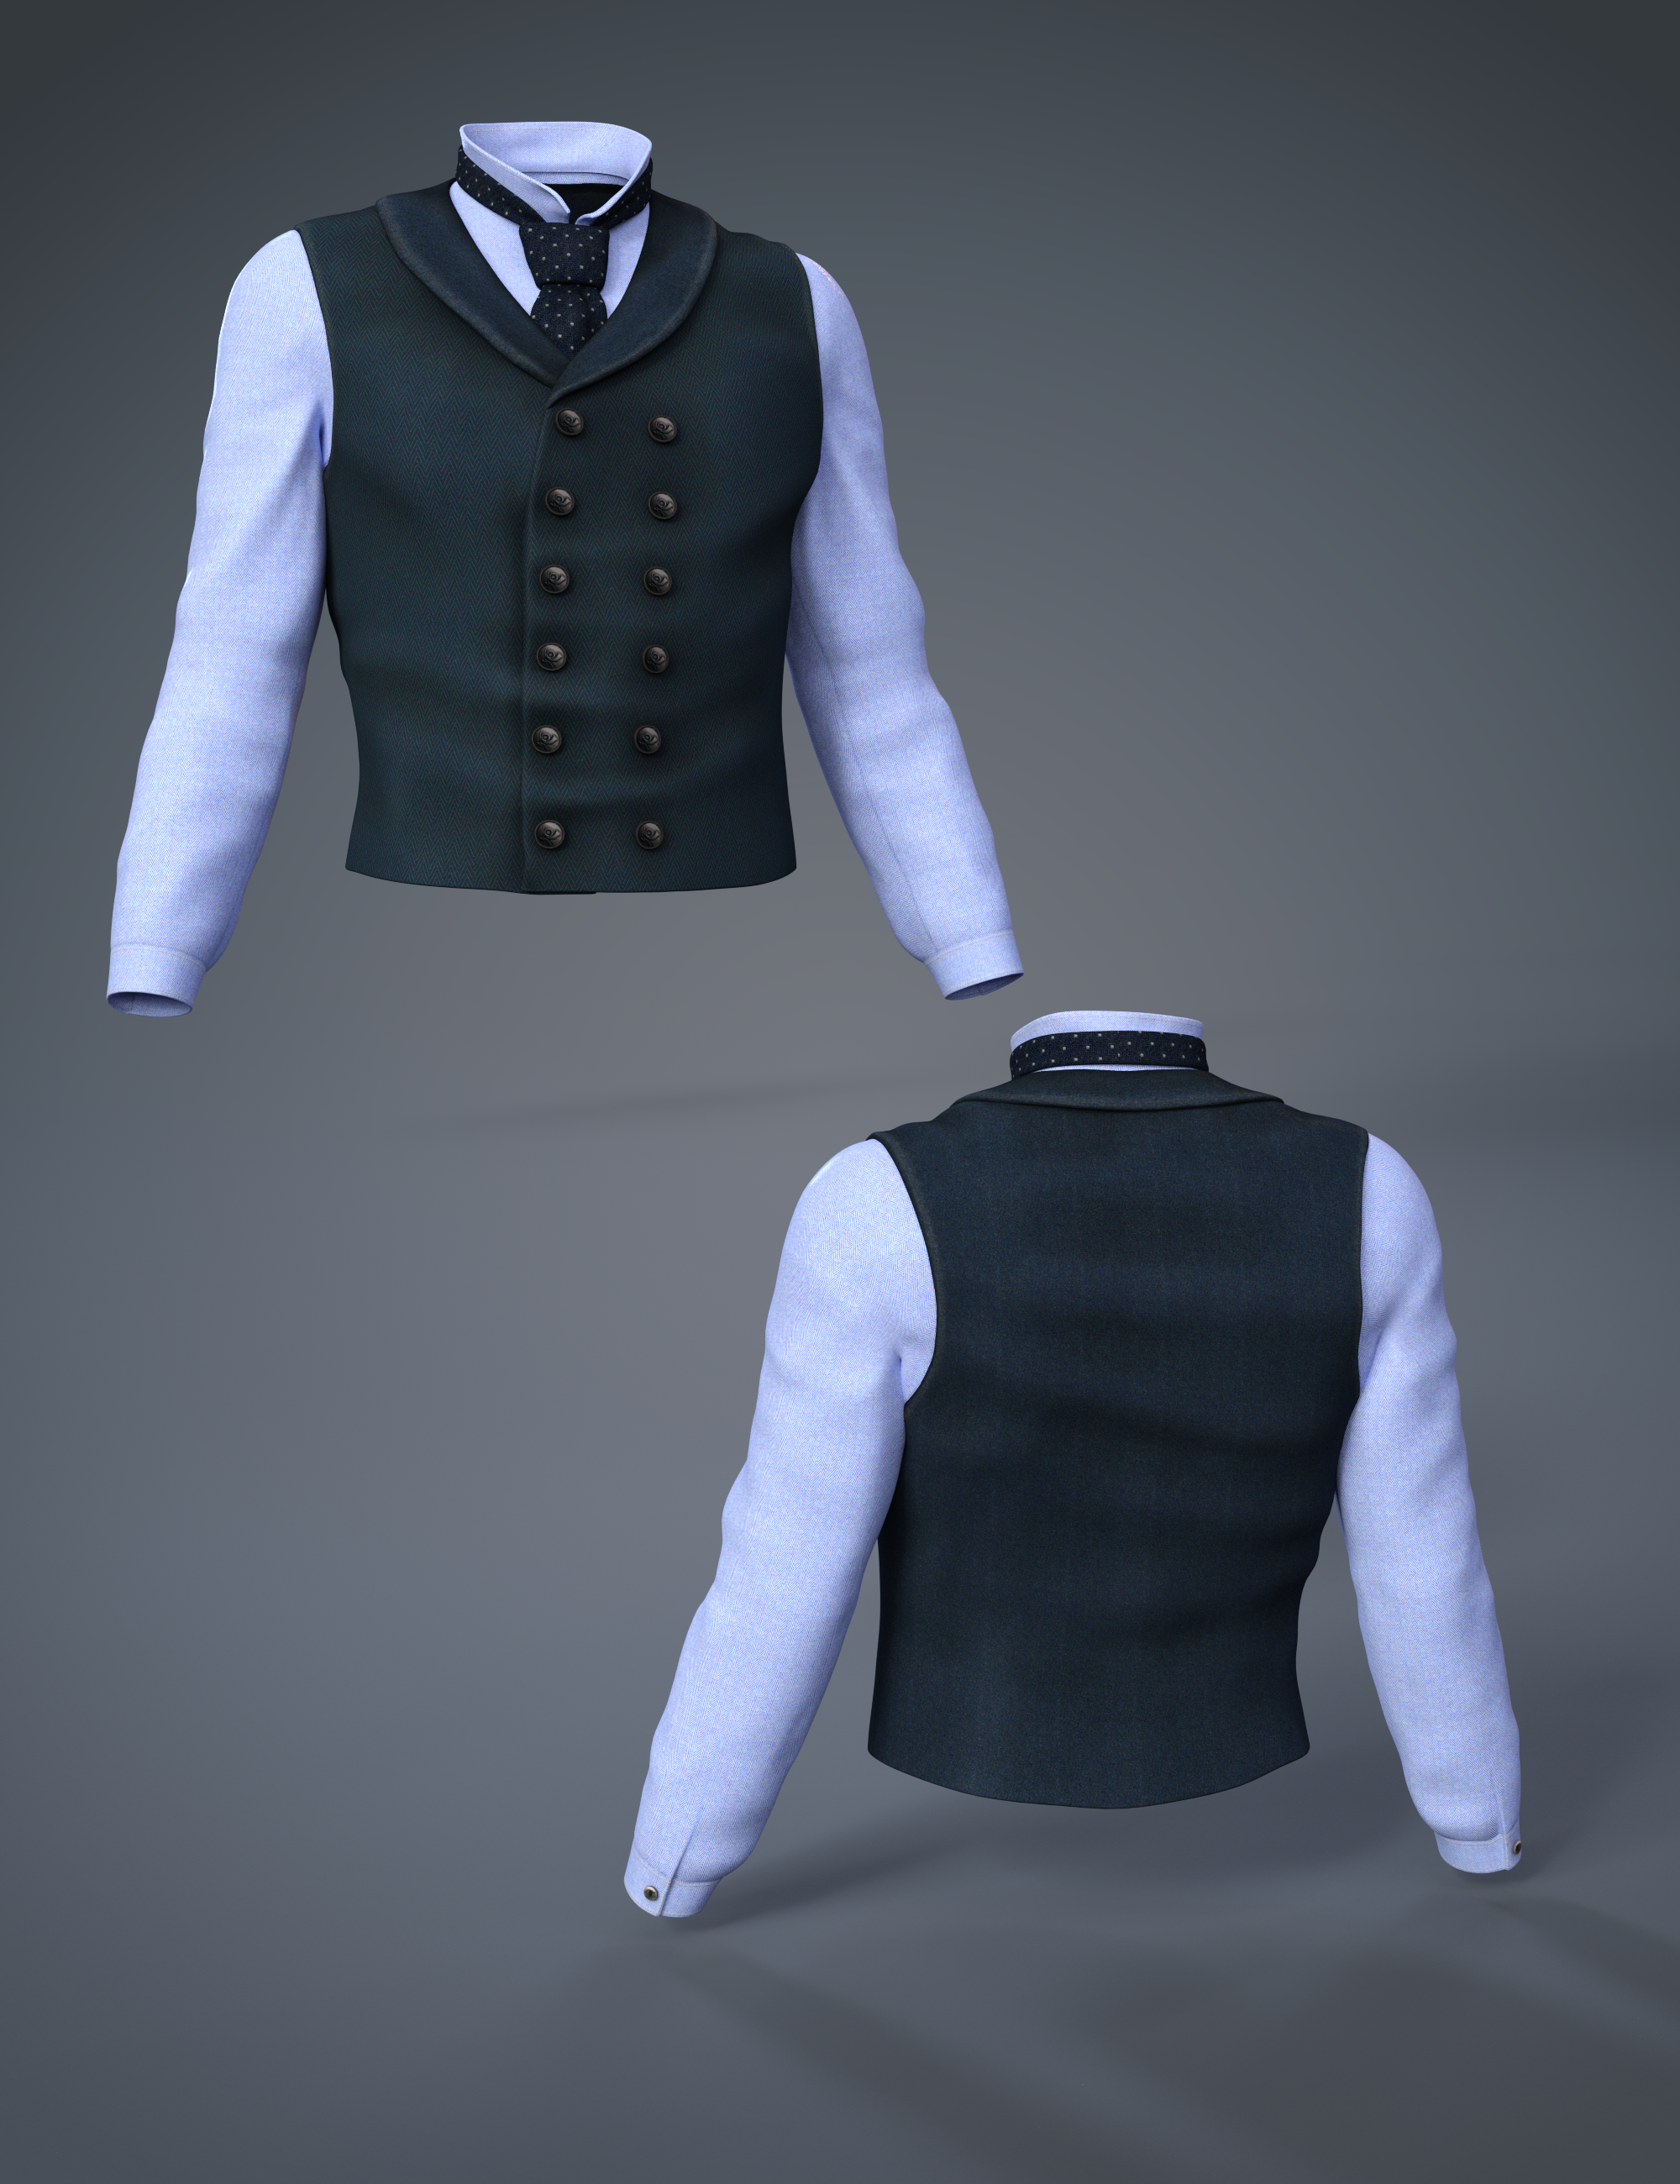 Ranch Outfit Waistcoat for Genesis 8 Males by: MadaArien, 3D Models by Daz 3D